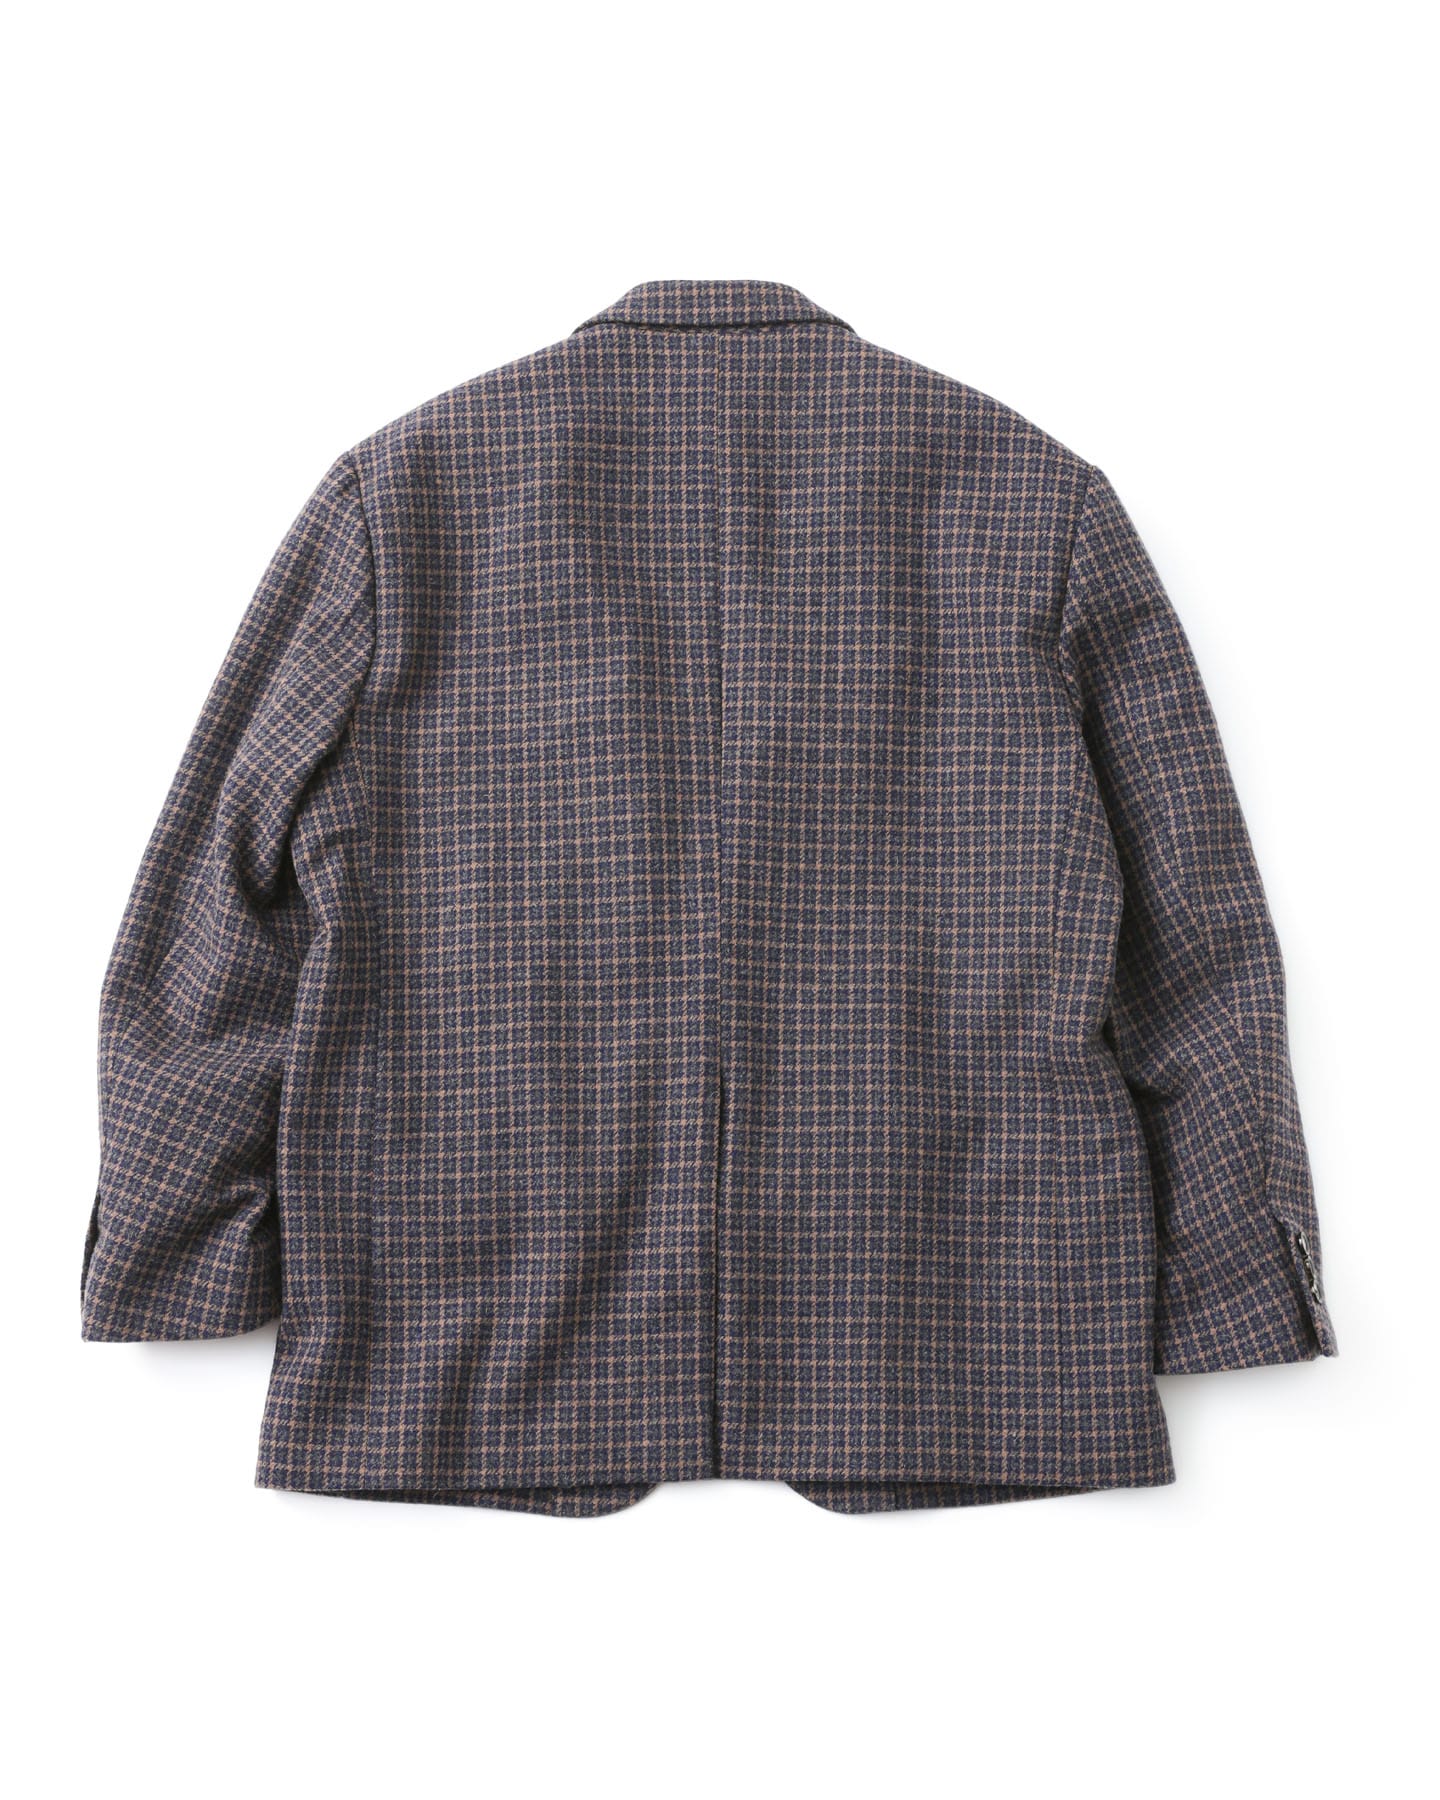 SOPH. | BLENDED WOOL CLASSIC 2BUTTON JACKET(M NAVY CHECK):